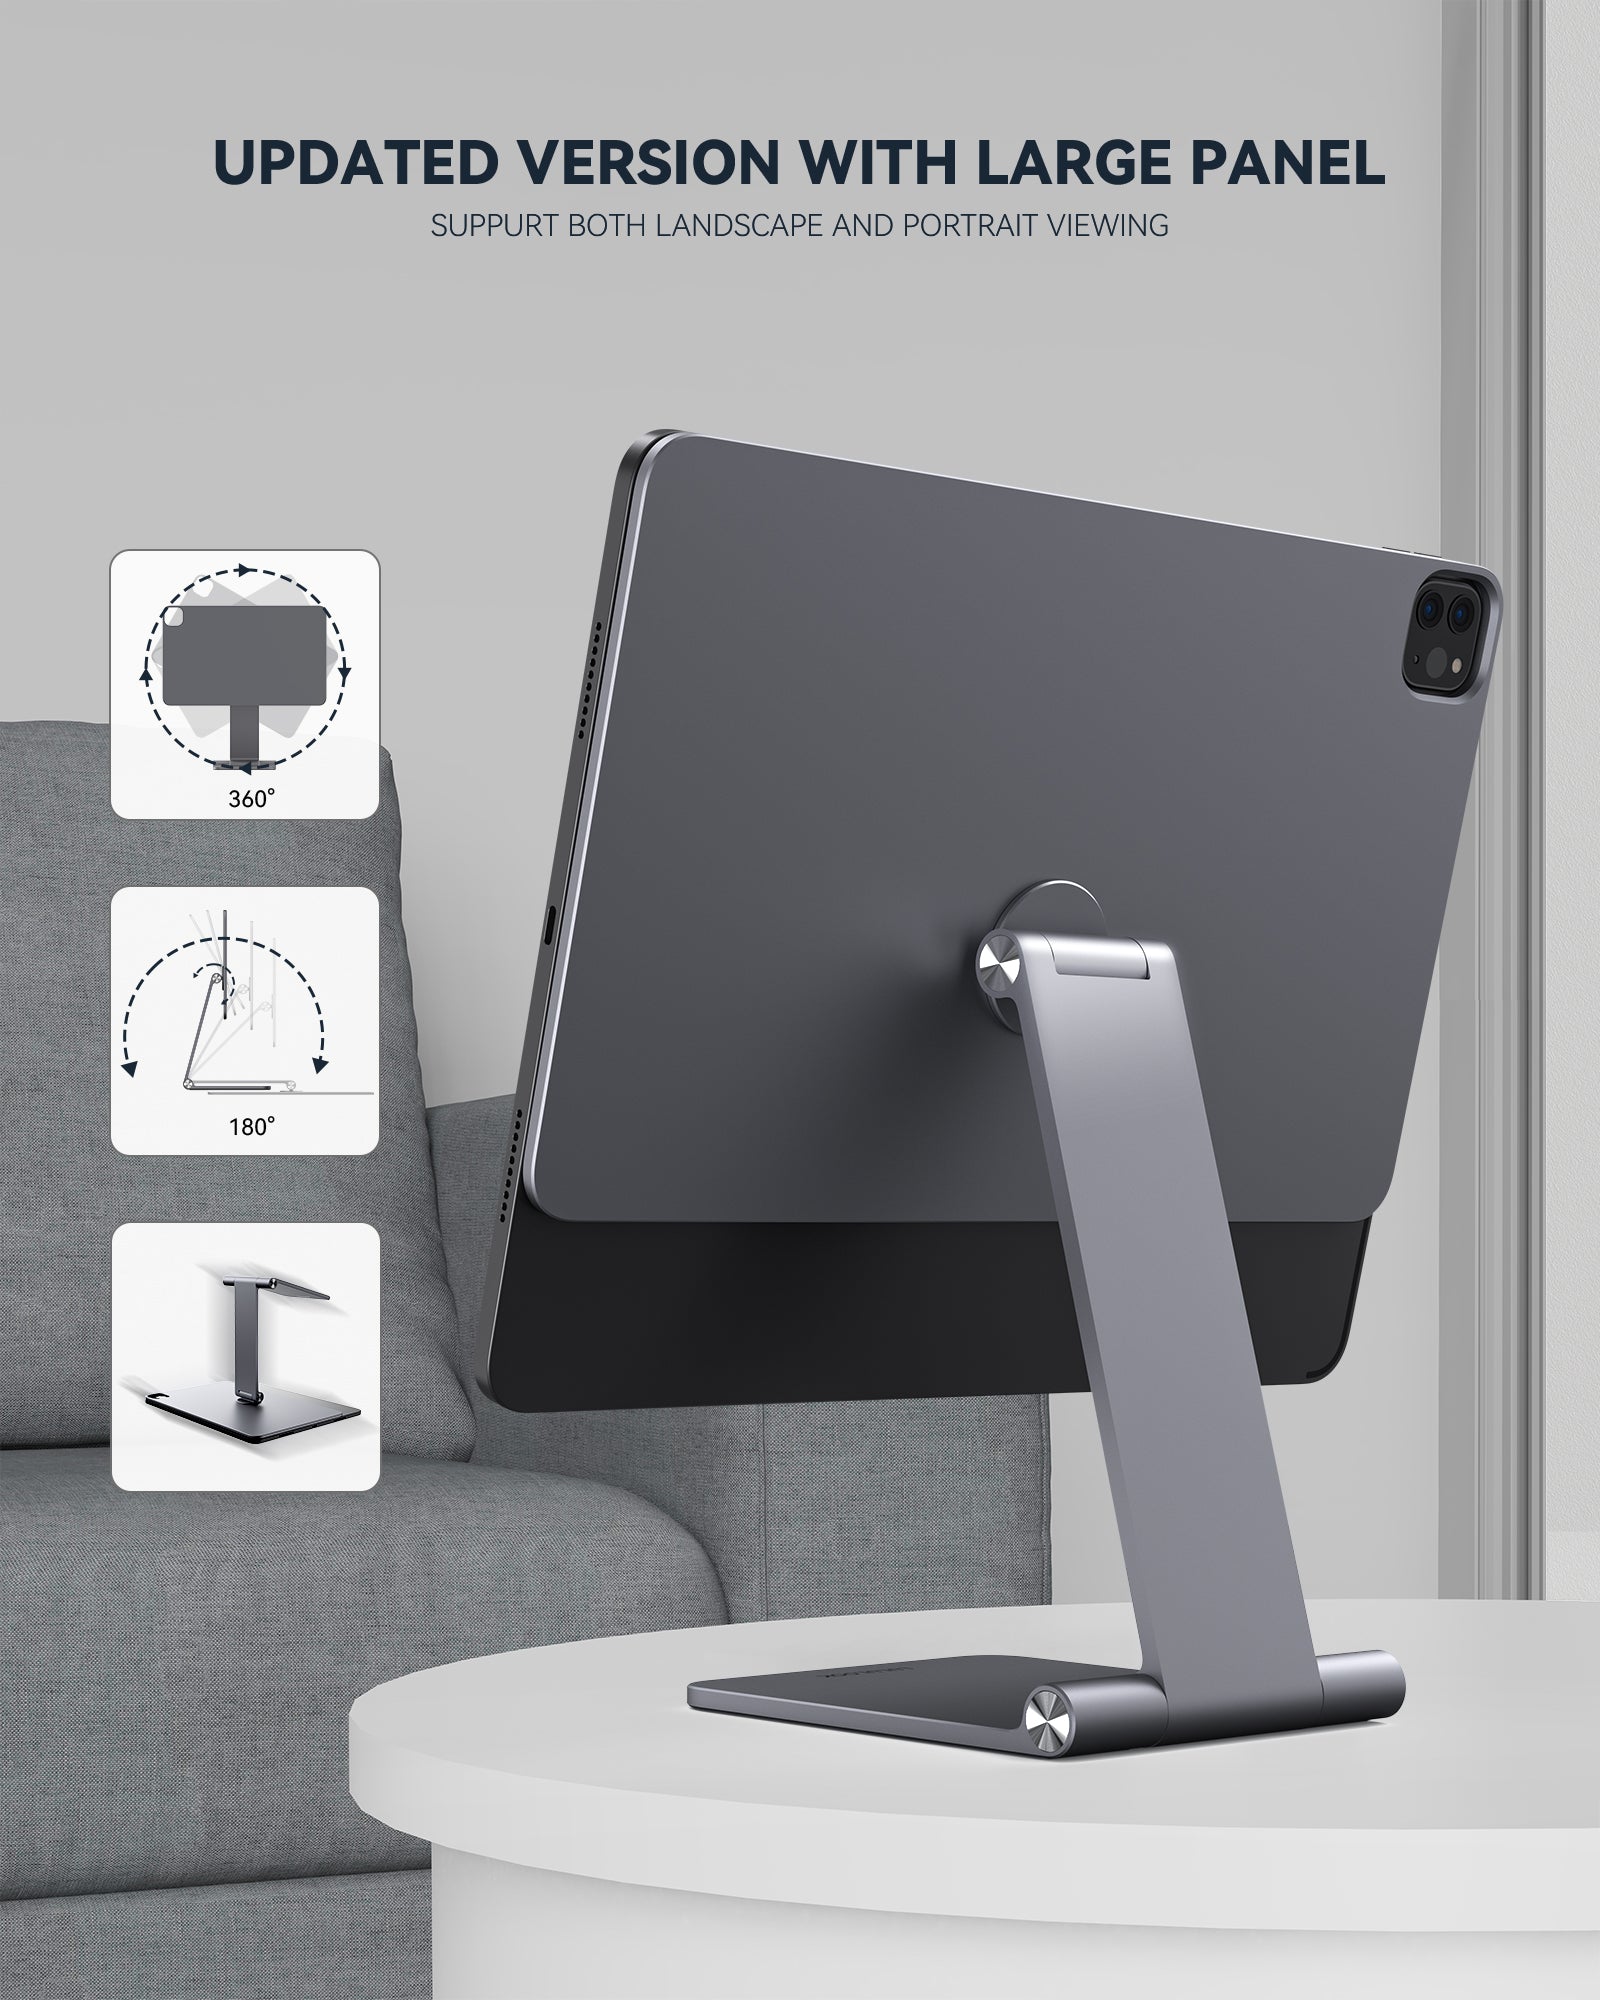 Lululook Foldable Magnetic iPad Stand, Magnetic iPad Pro Holder for Desk -  Lululook Official